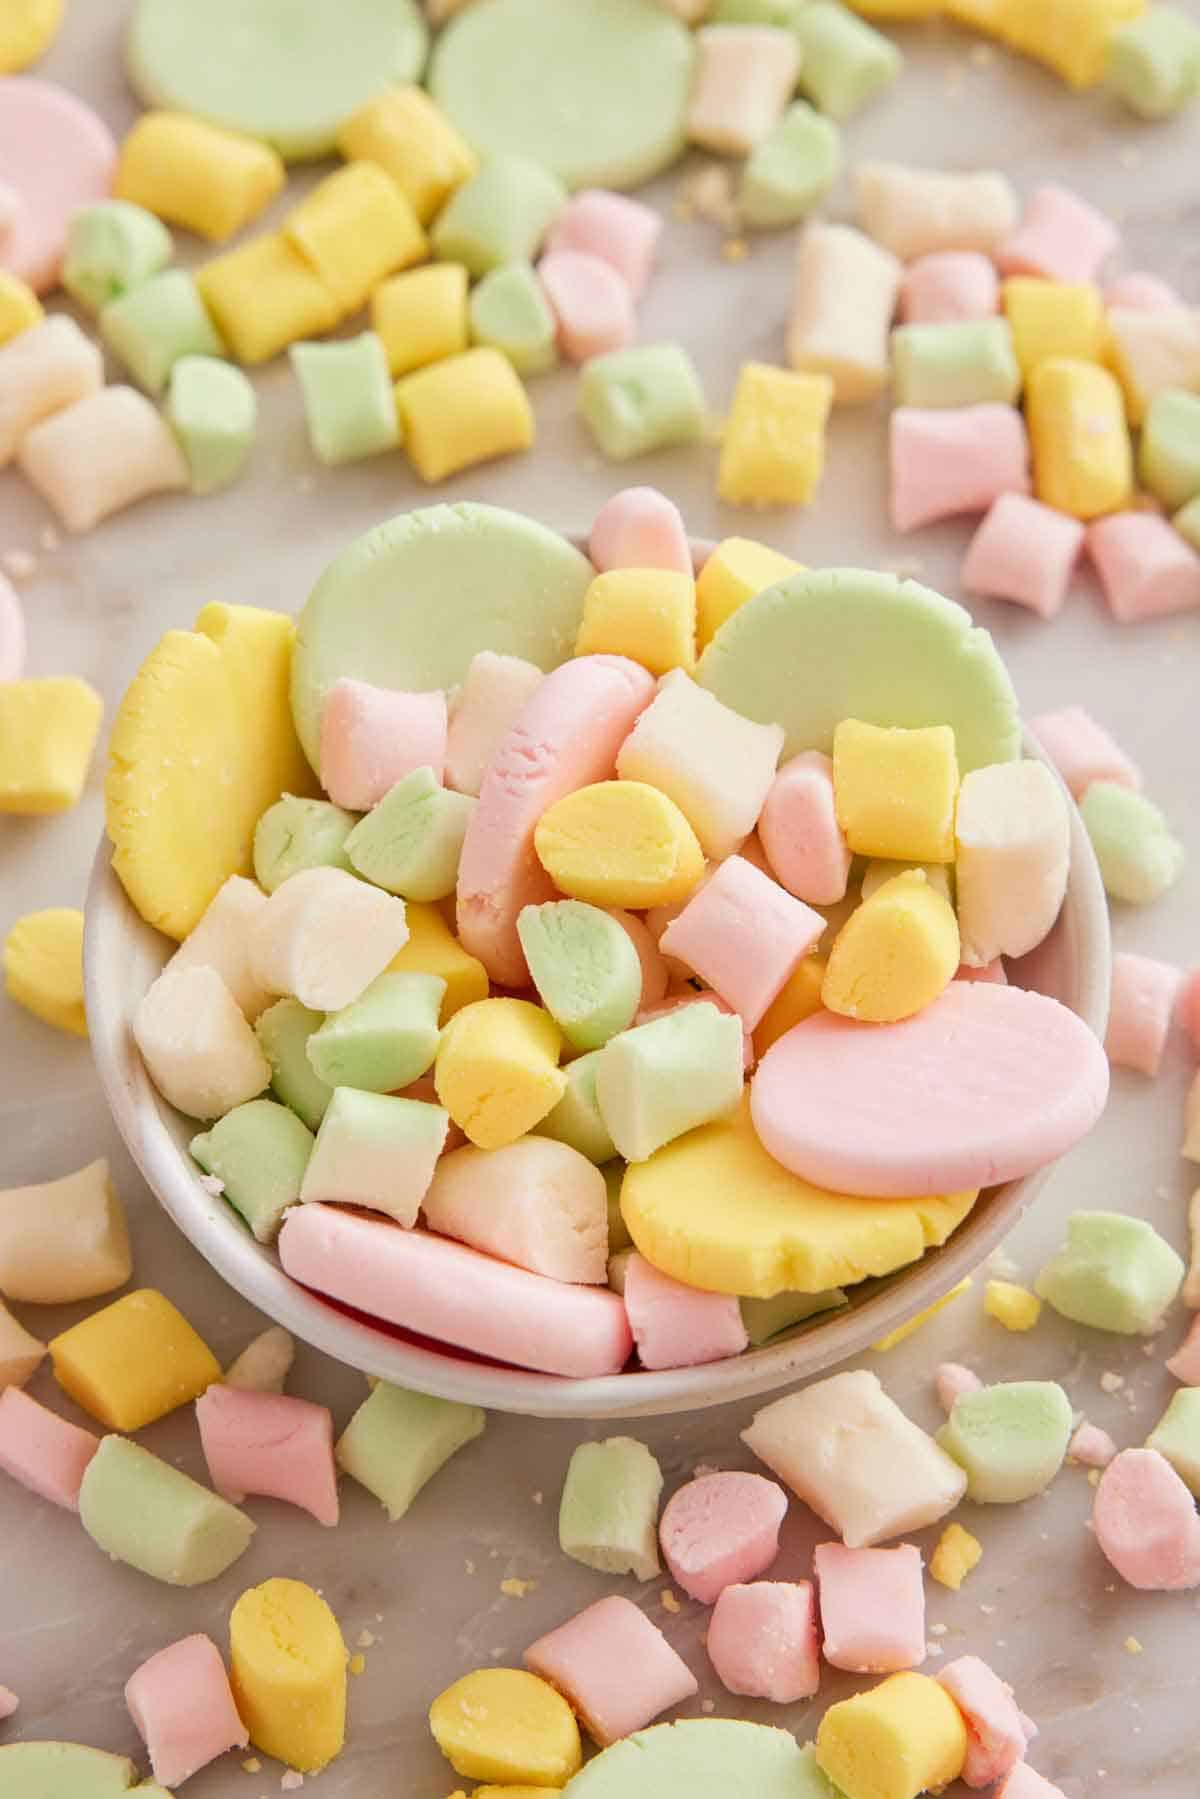 A bowl of butter mints, some flattened into coin shapes with more surrounding the bowl.